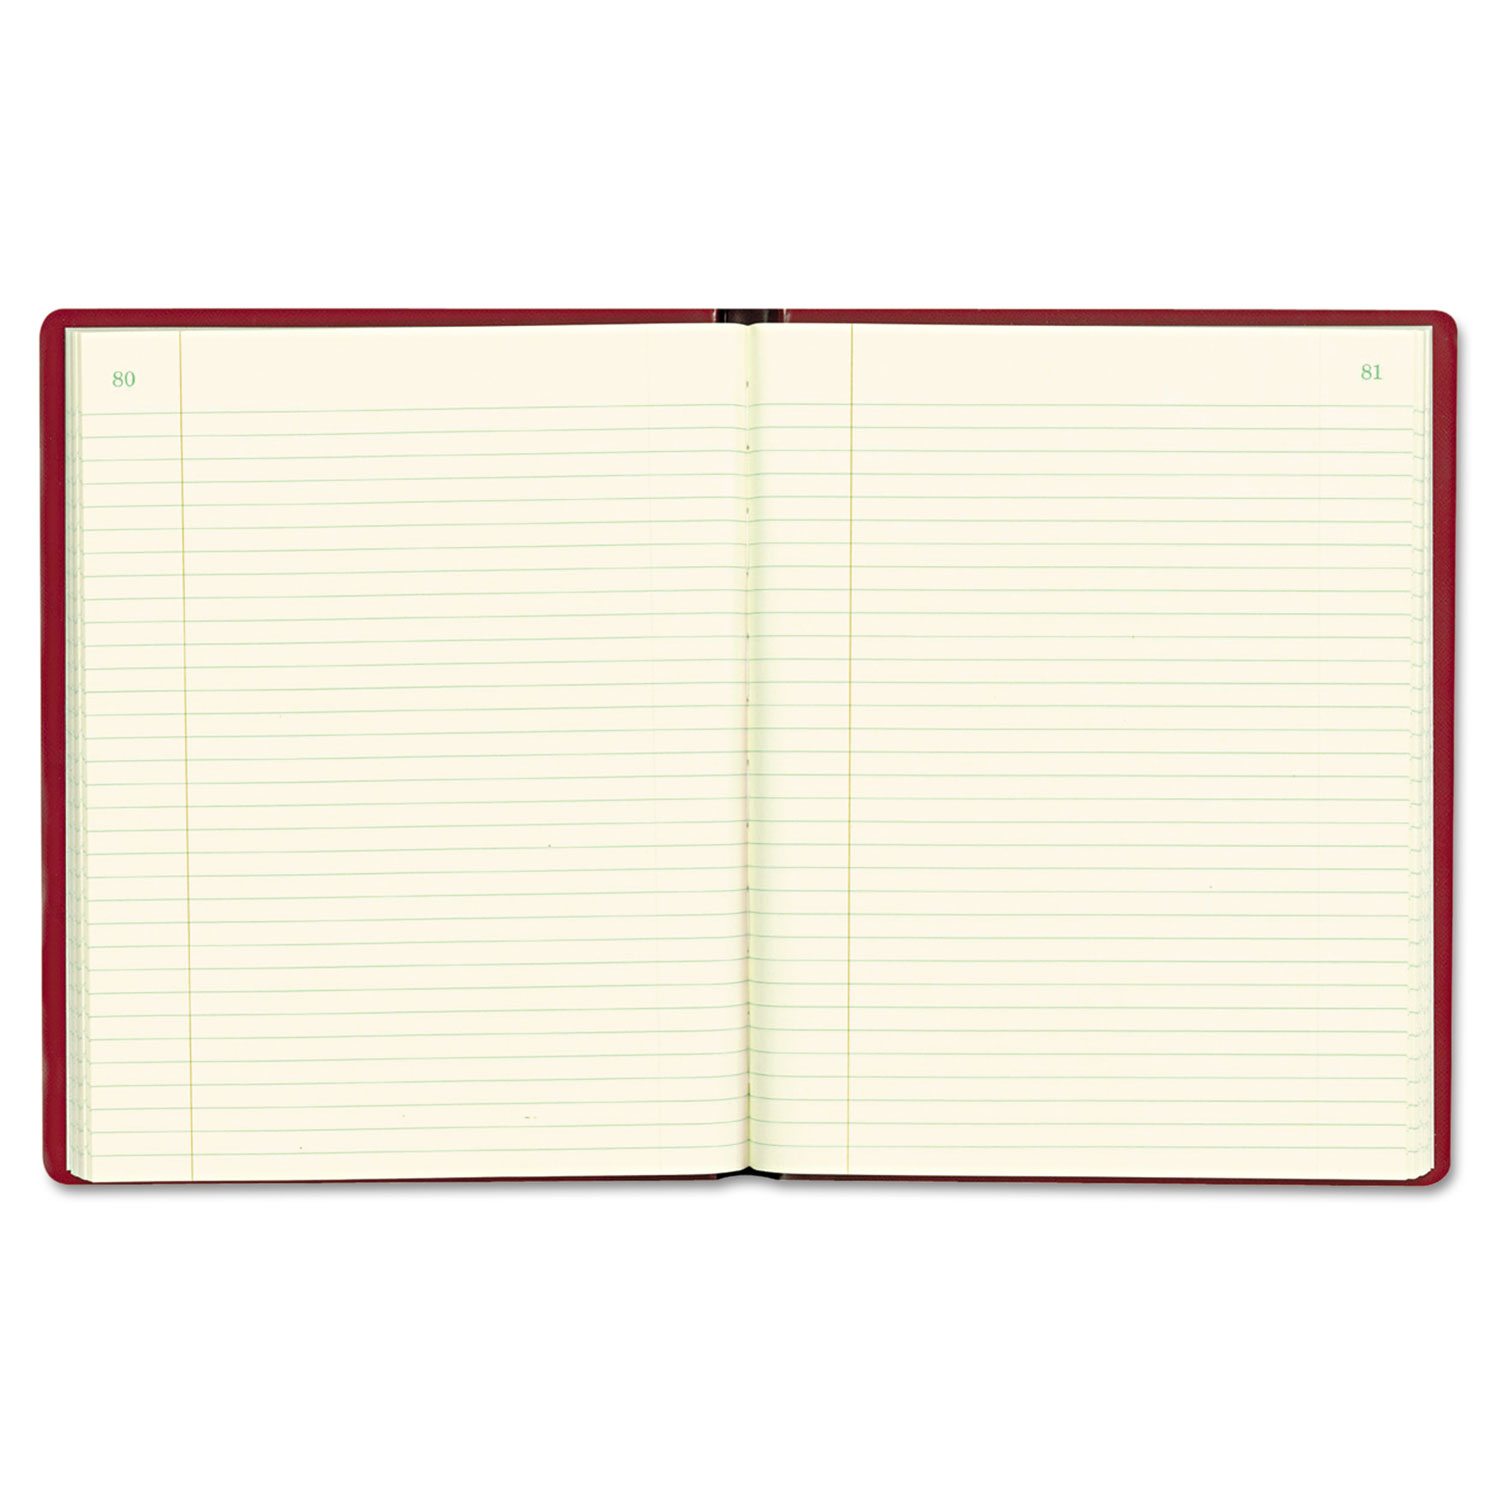  Rediform 57231 Red Vinyl Series Journal, 300 Pages, 7 3/4 x 10 Sheets, 8 1/4 x 10 1/2 Book, Red (RED57231) 